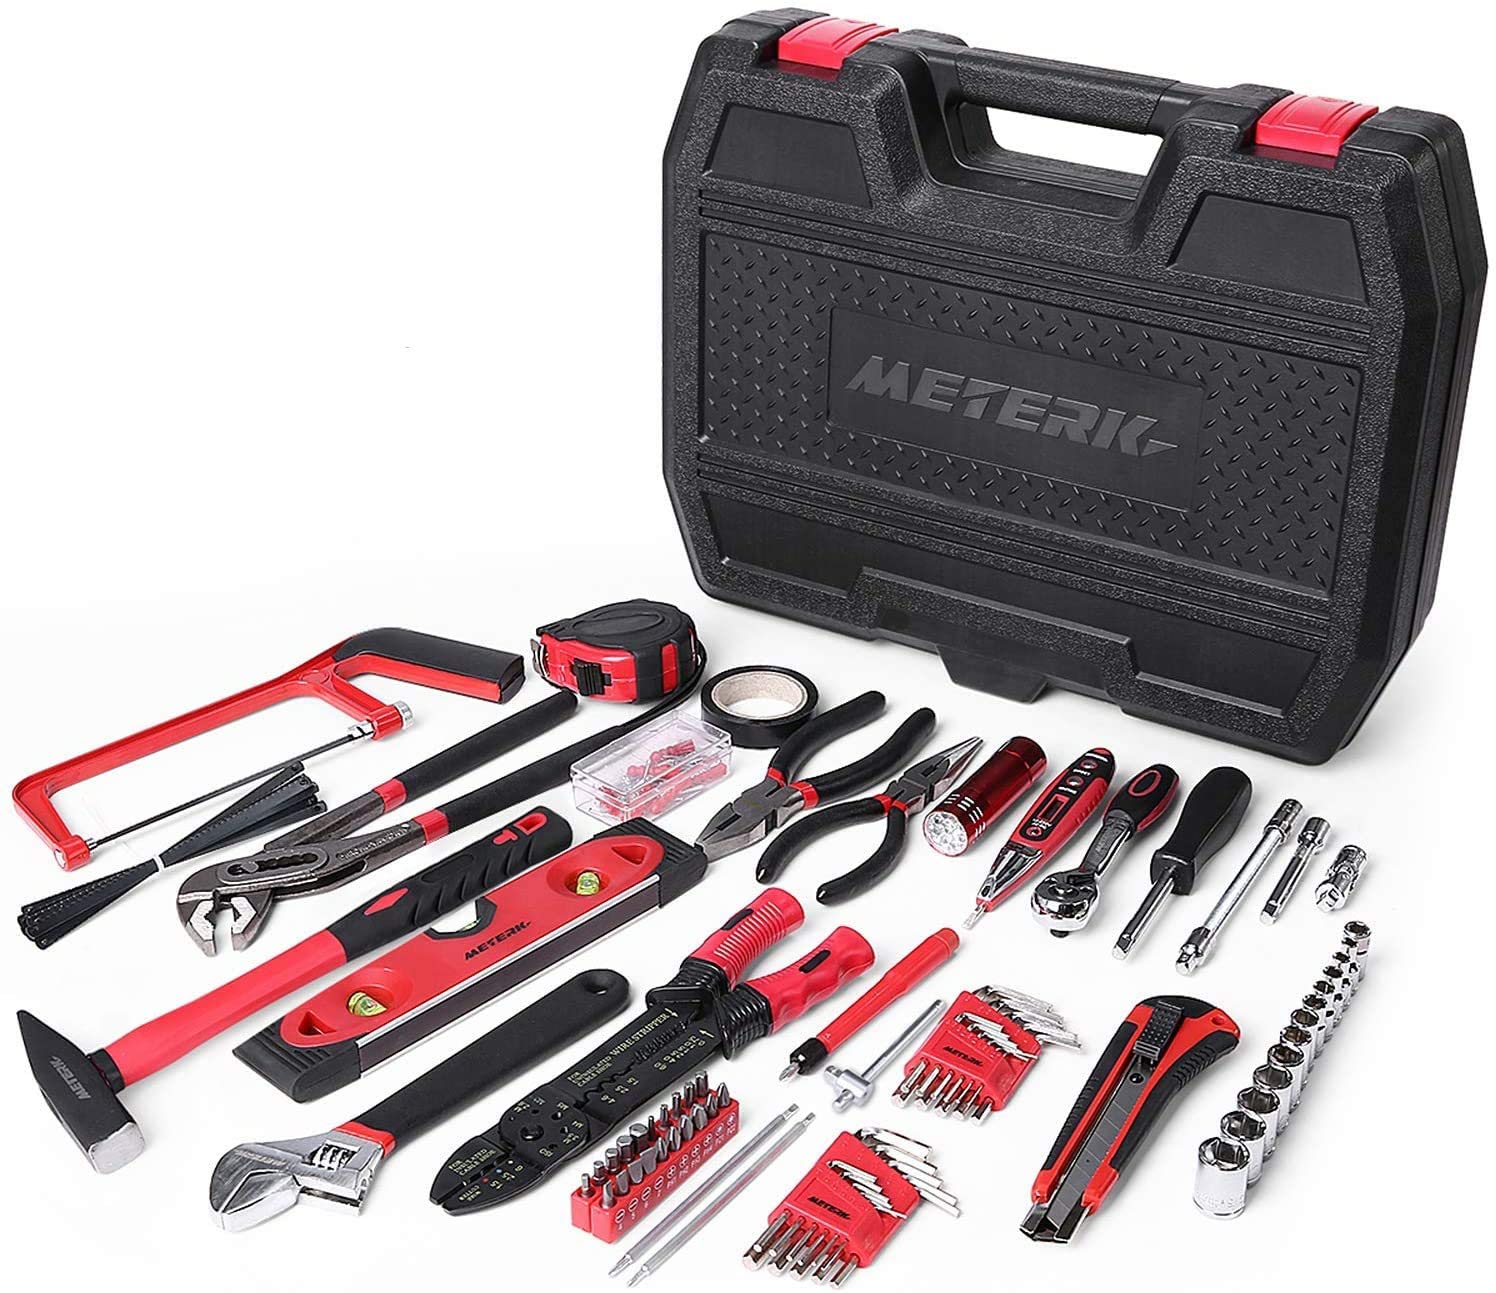 Meterk 170 Pcs Home Tool Kit- Household/Auto Repair Mechanic Tool Set with Wrenches, Screwdriver Set, Sockets Kit, Hammer, Pliers and Toolbox Storage Case for Homeowner, DIYER, Handyman…